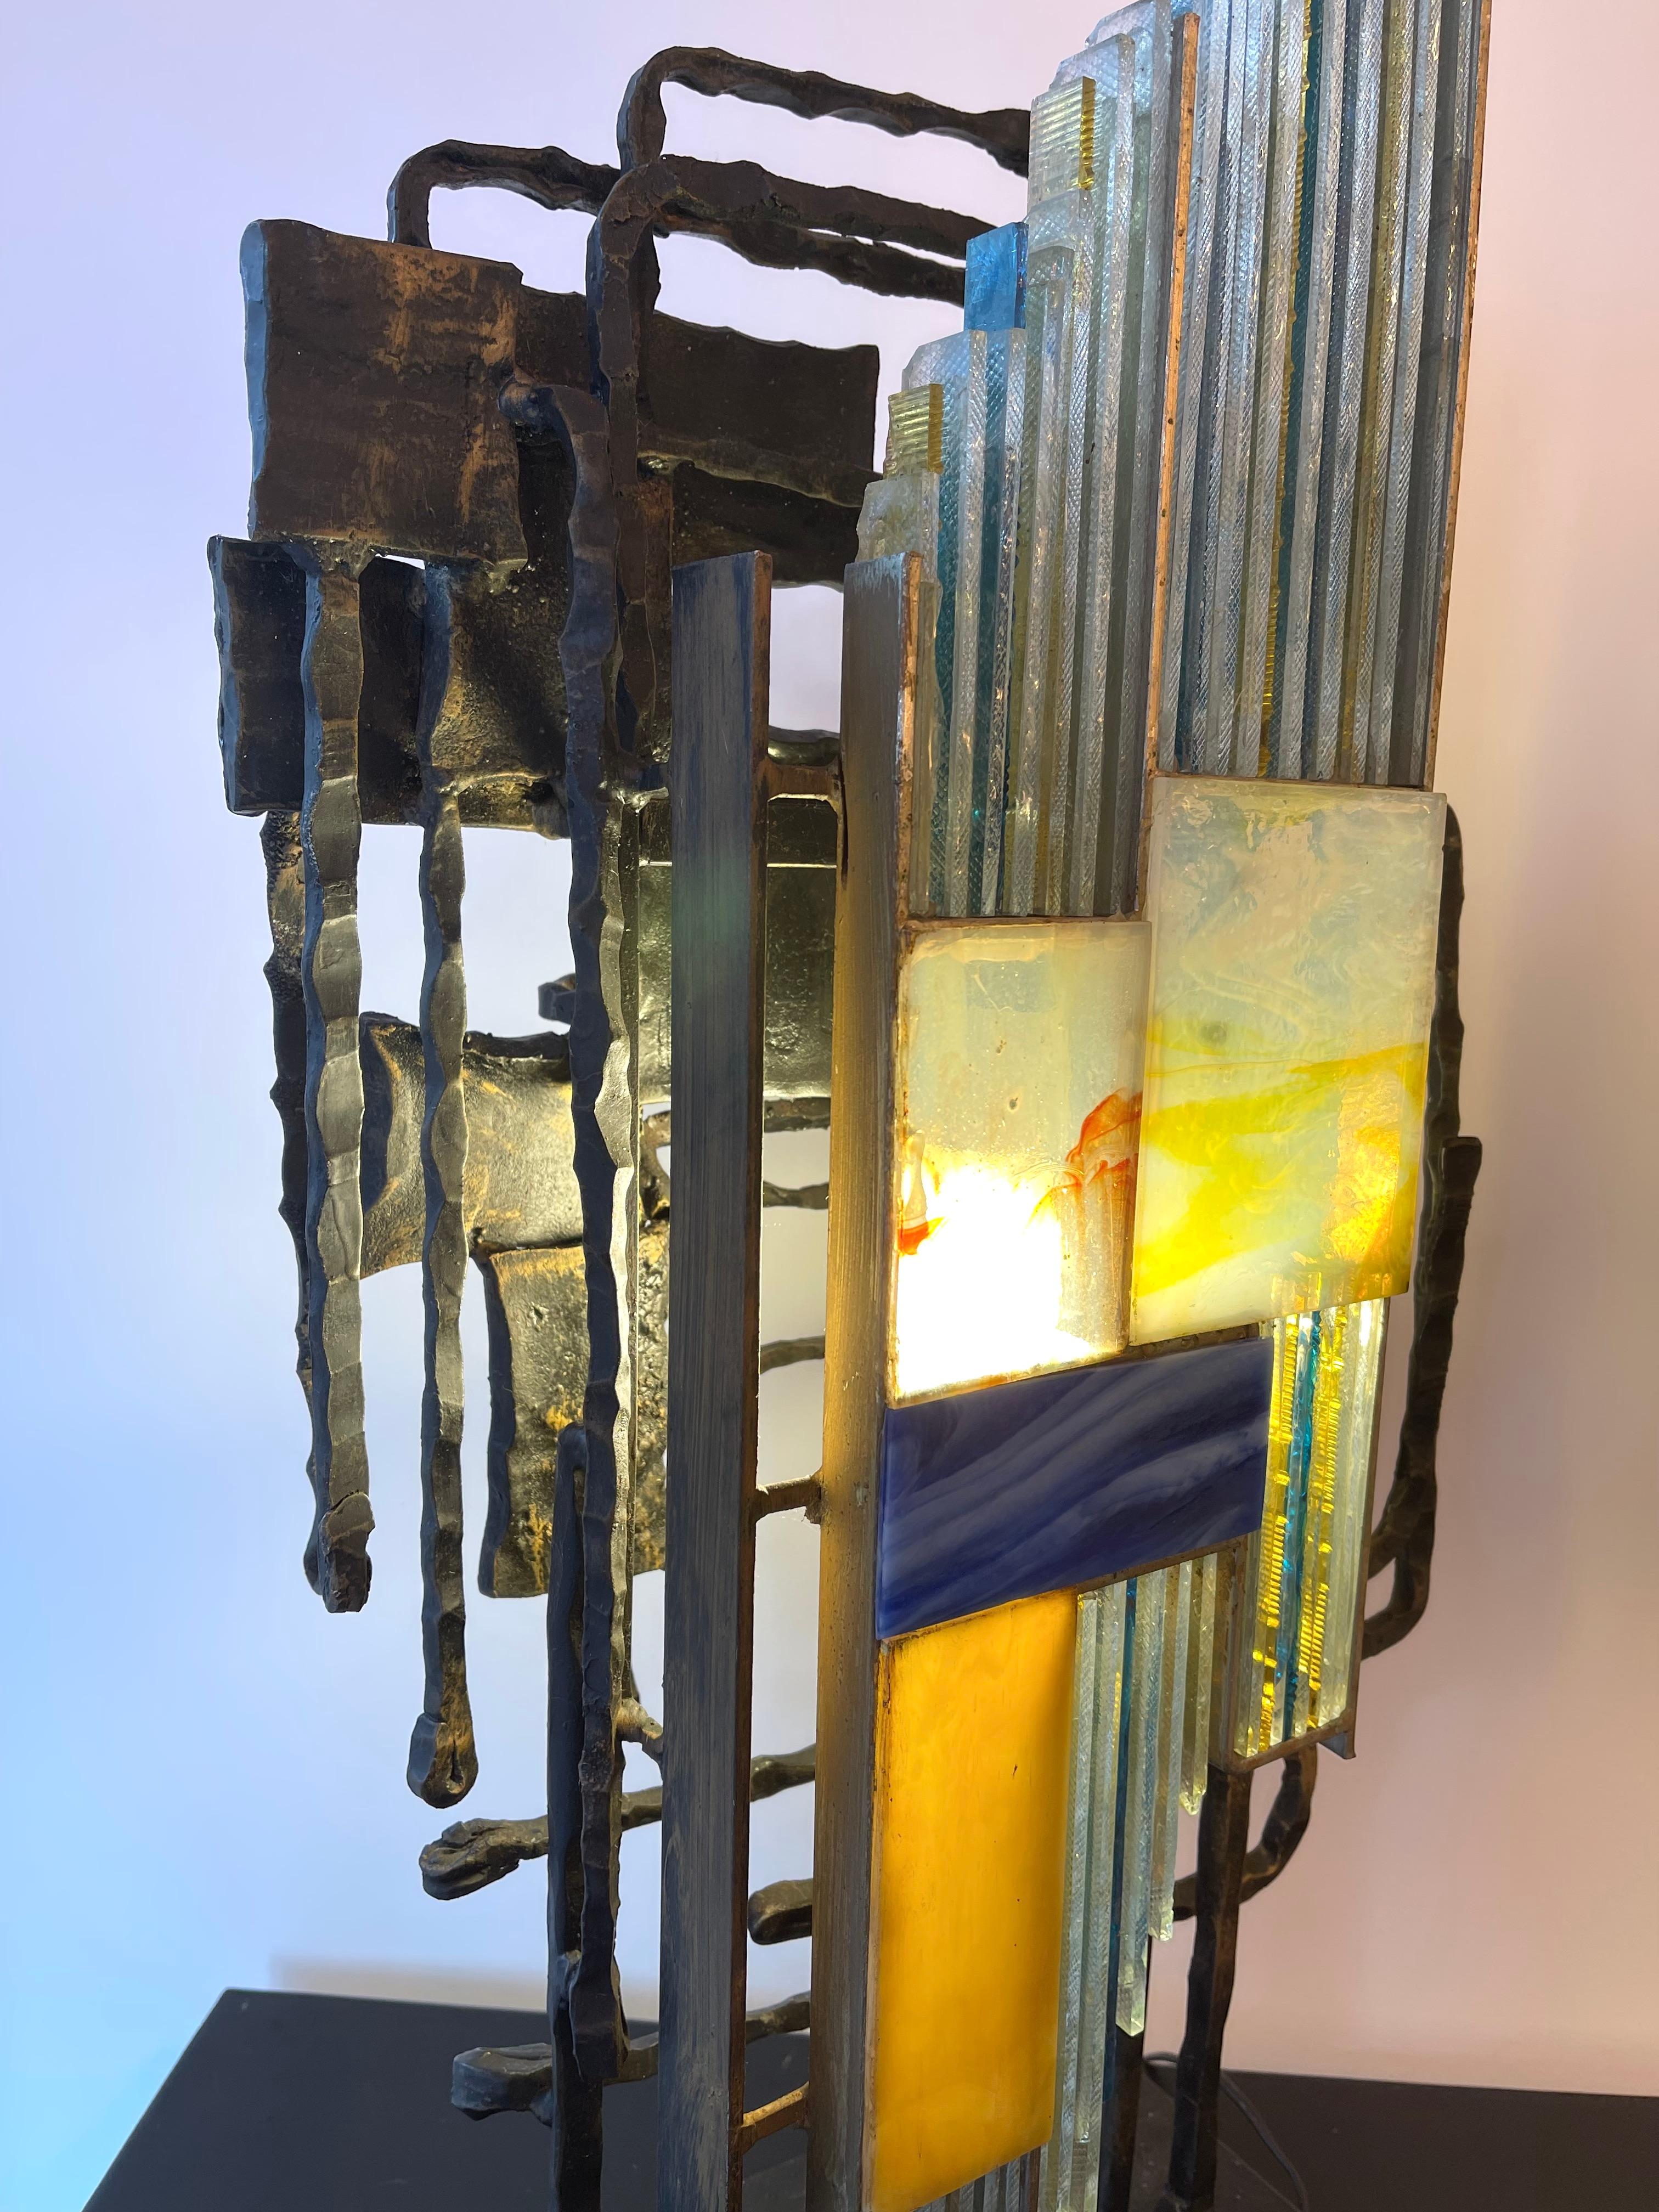 Mid-Century Modern sculpture lamp light sconce hammered glass and wrought iron, by the manufacture Biancardi & Jordan in Verona in a Brutalist style, the concurrent of Longobard and Poliarte during the 1970s. Famous design like Carlo Aldo Nason for